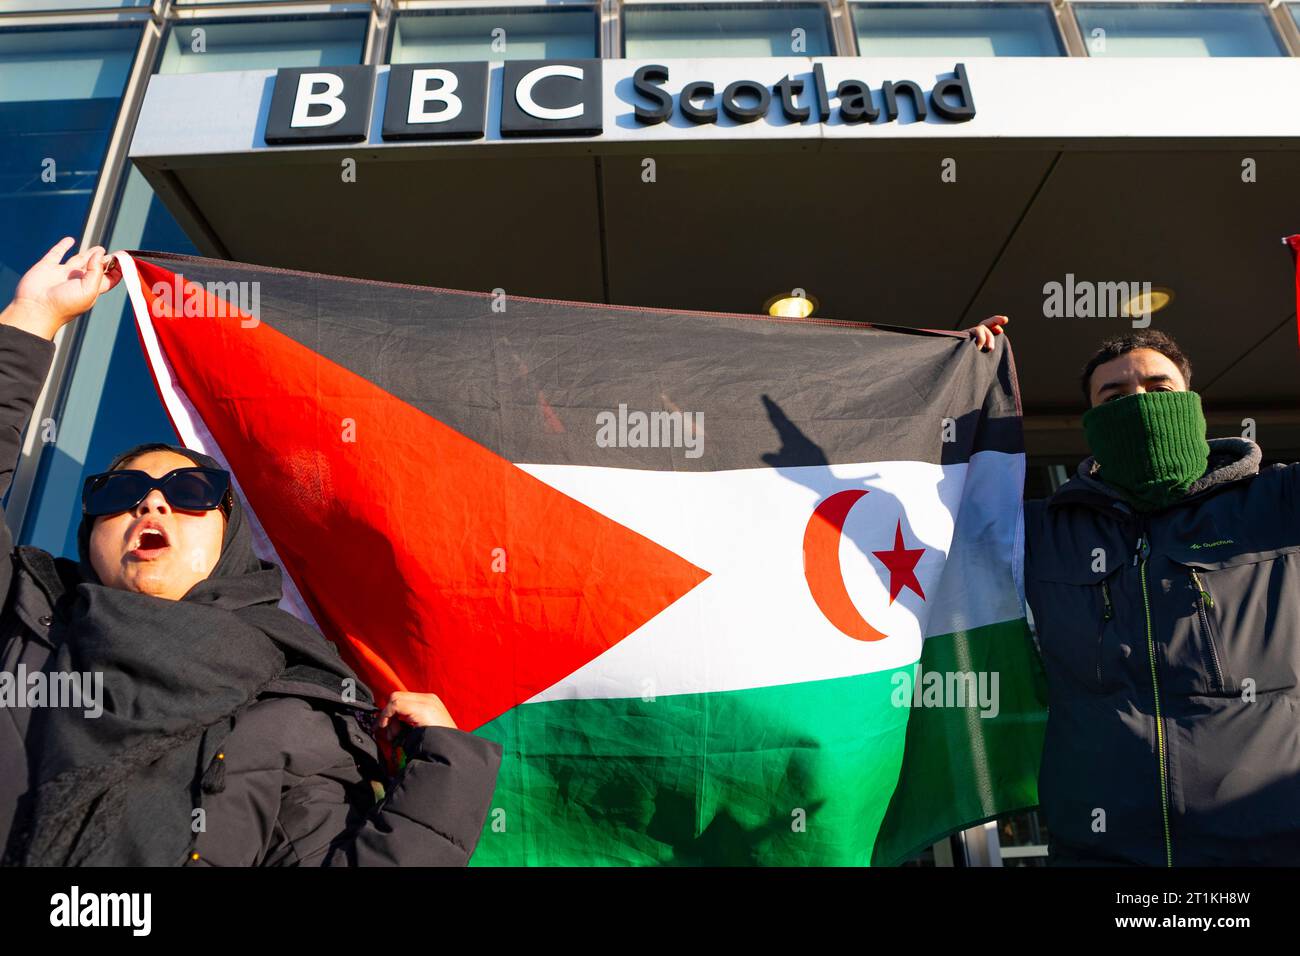 Glasgow, Scotland, UK. 14th October 2023.  Supporters of Palestine attend a rally and demonstration in Glasgow at the Buchanan  street steps today. They were protesting against the severe retaliation by Israel against Gaza following the Hamas attack  on Israel last week. After the rally the protesters marched through the city centre to the BBC studios at Pacific Quay where a rally against the BBC was held. Iain Masterton/Alamy Live News Stock Photo